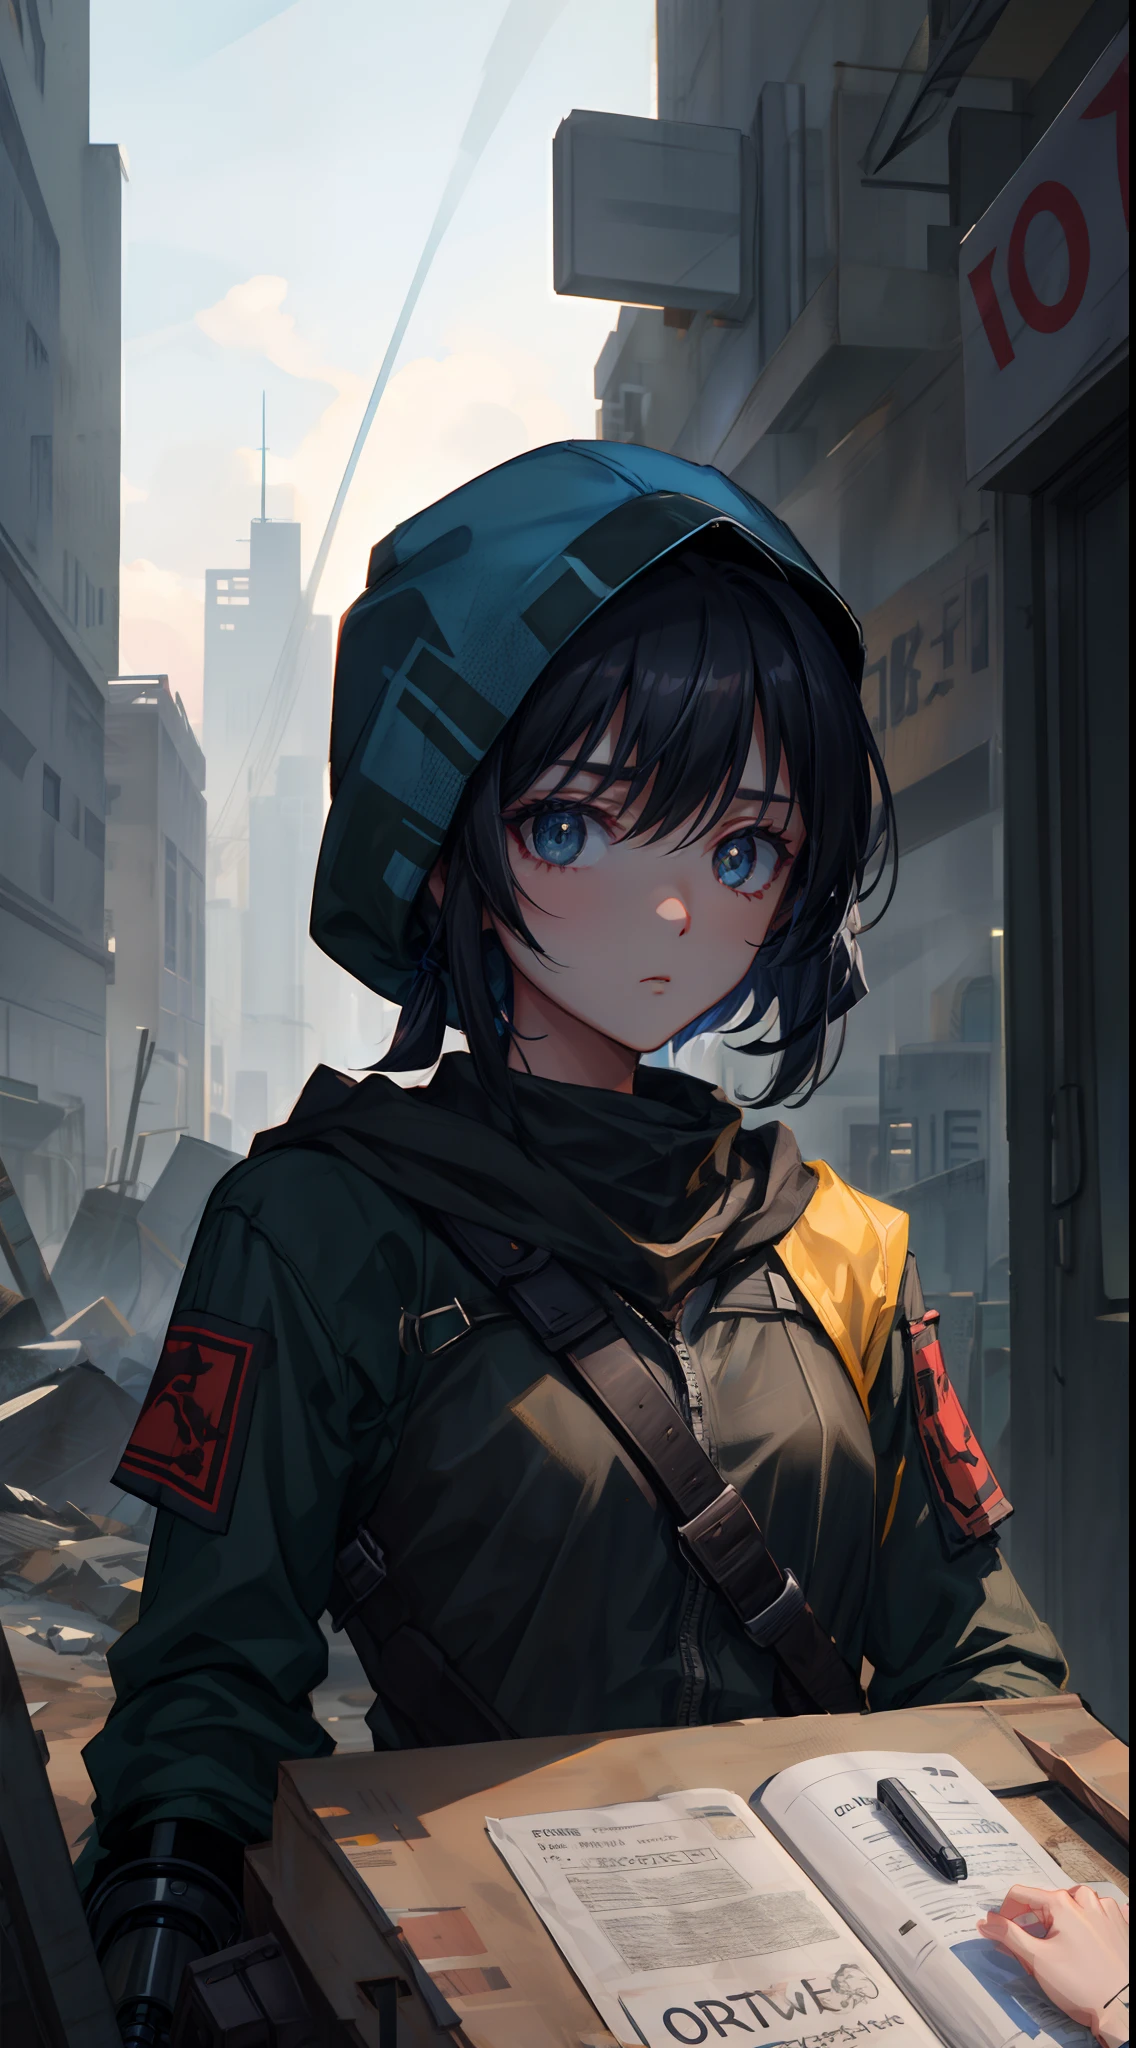 1 girl, upper body, single focus, survivor appearance, rugged post-apocalyptic attire, gritty wasteland, (post-apocalyptic setting: 1.4), (fighting for survival: 1.3), cybernetic features, dystopian aura, [depth of field, ambient lighting, apocalyptic style foreground, cybernetic modifications], Post-Apocalyptic Dystopia, survival, cybernetic wasteland, (improvised tech), (battle-worn accessories: 1.2), intricate details, enhanced lighting.